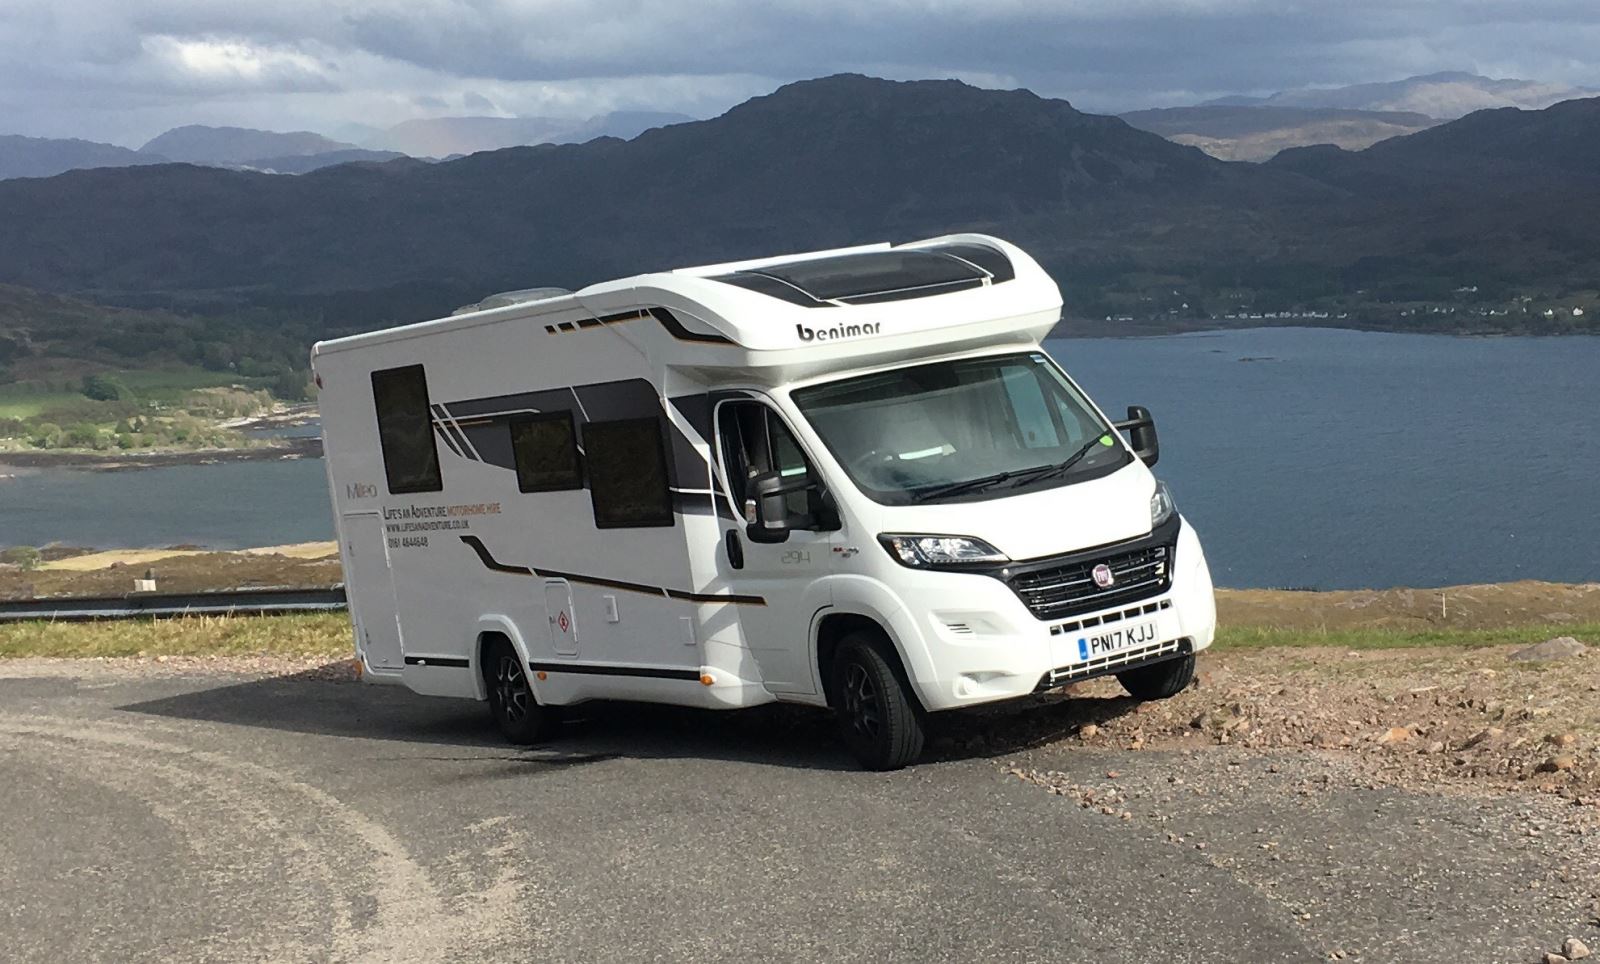 Do you need gap insurance for a new motorhome?